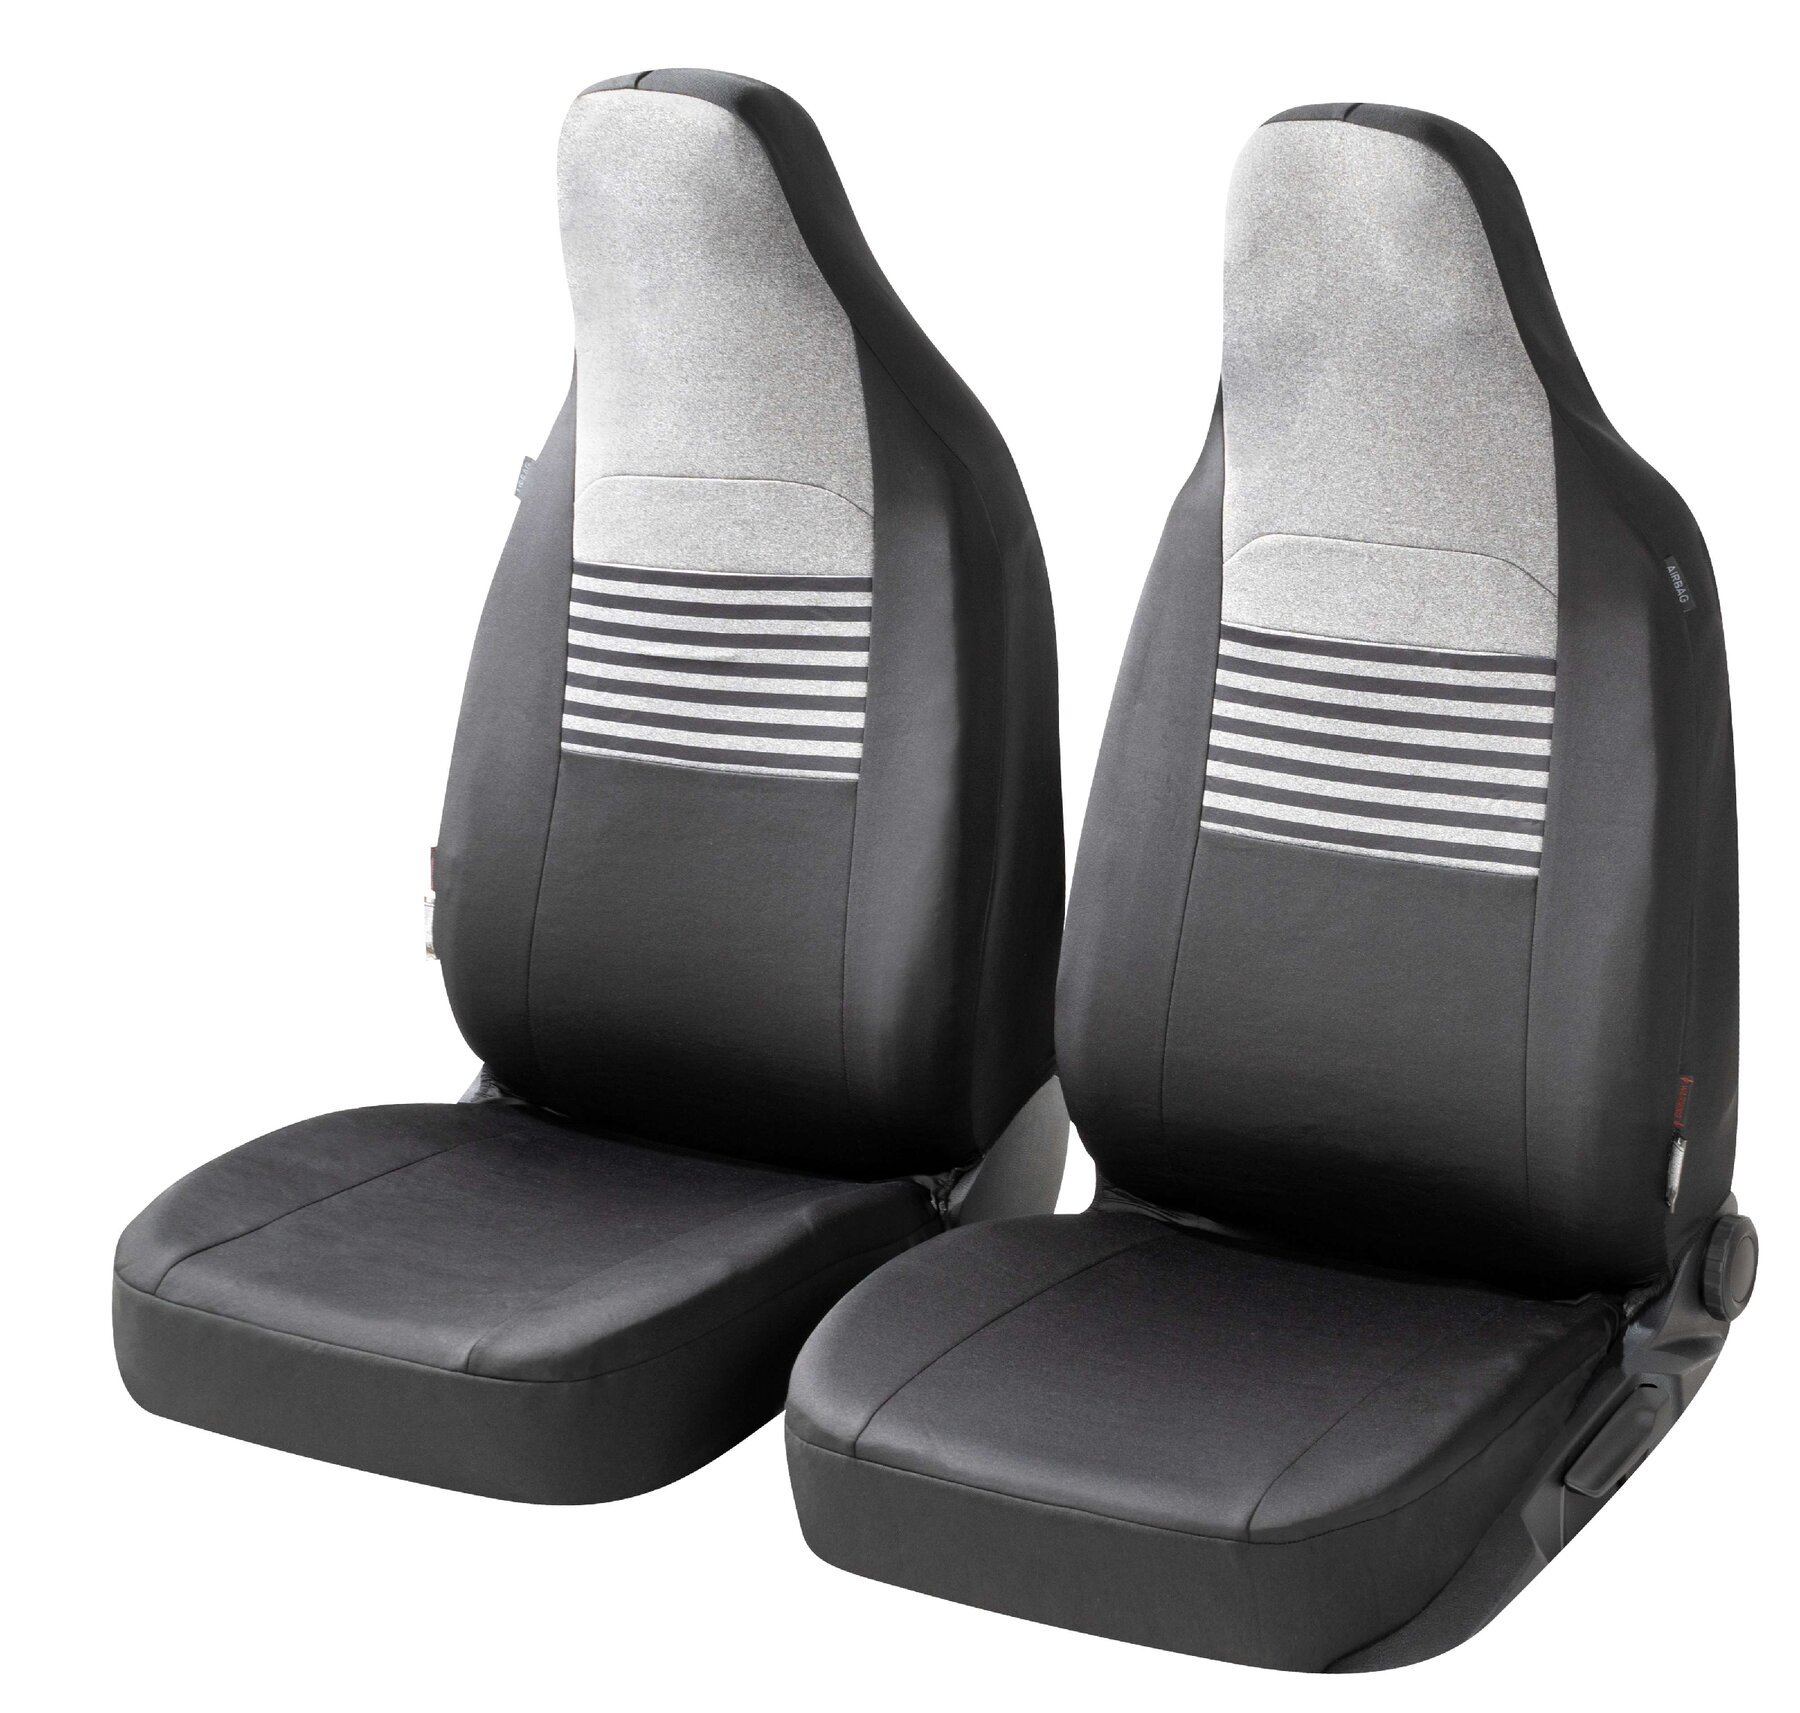 ZIPP IT Premium Car seat covers Gordon for two front seats with zip-system black/grey